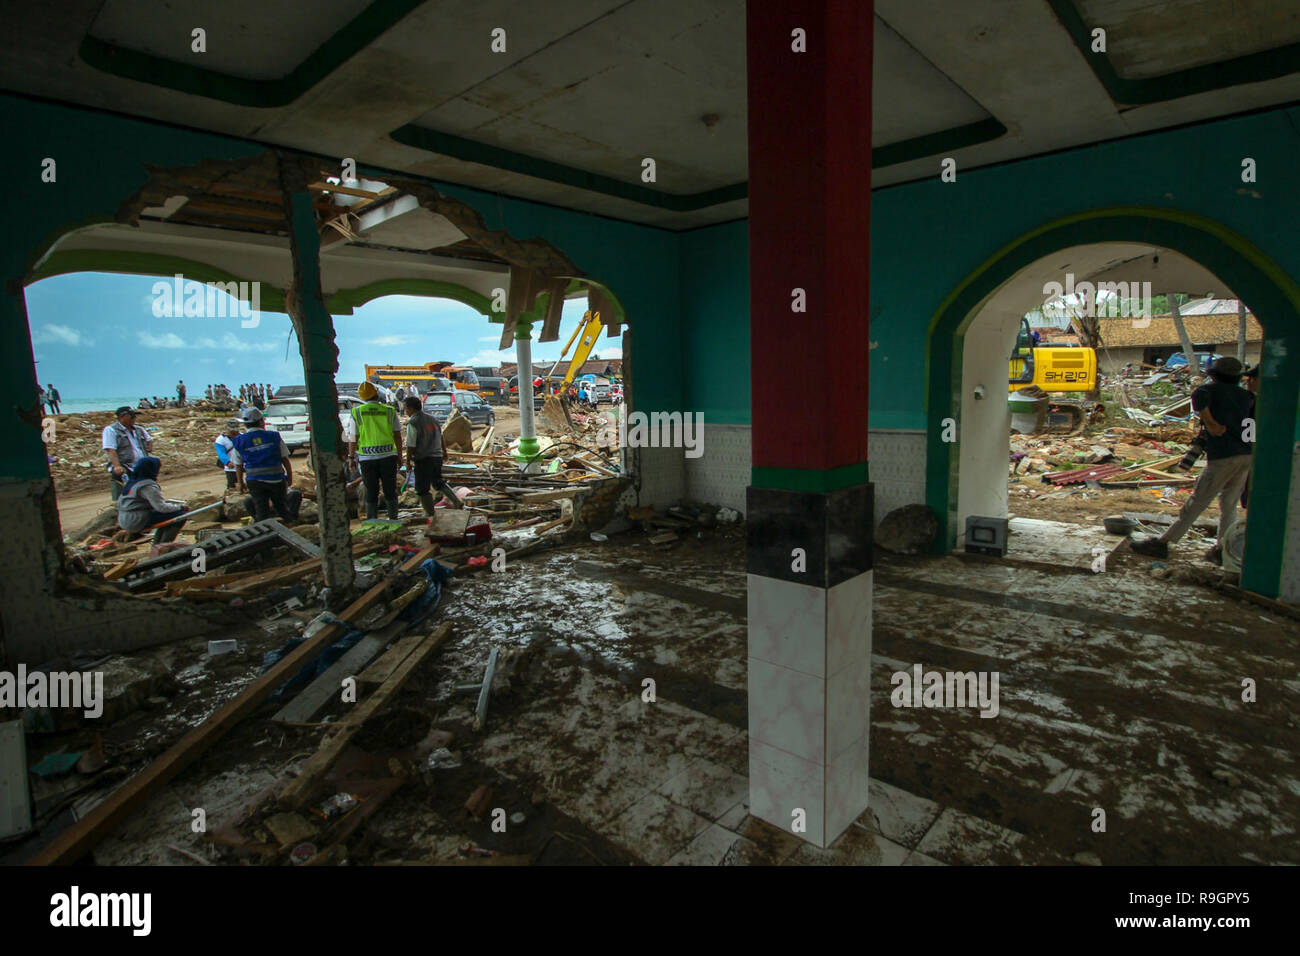 South Lampung, Lampung, Indonesia. 25th Dec, 2018. LAMPUNG, INDONESIA - DECEMBER 25 : People searching something at his house after the tsunami hit at South Lampung on Decemebr 25, 2018 in Pandegralang regency, Banten Province, Indonesia.A tsunami struck Indonesia's Sunda Strait, the expanse between the islands of Java and Sumatra, on the night of December 22, local time. Credit: ZUMA Press, Inc./Alamy Live News Stock Photo